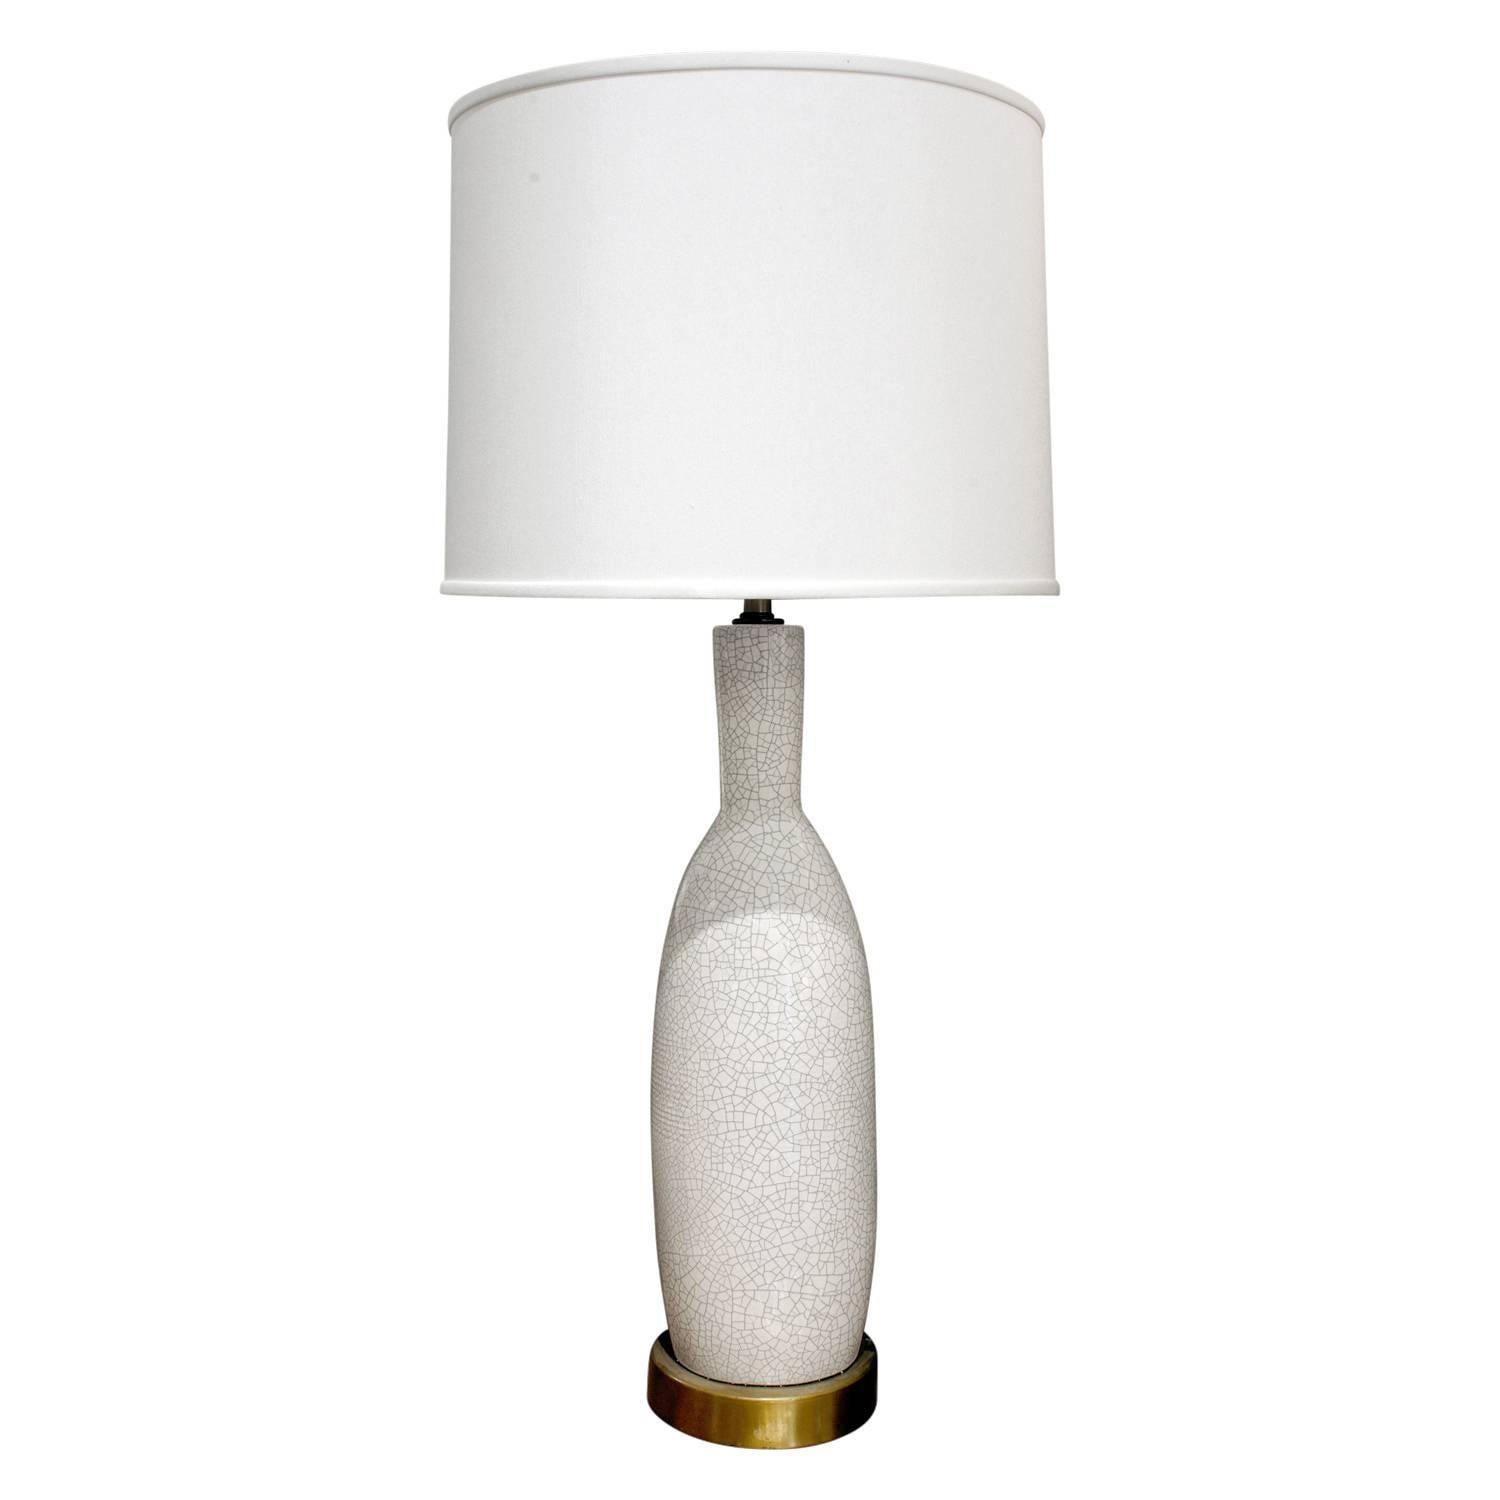 Large White Porcelain Table Lamp with Craquele Glaze, 1960s For Sale